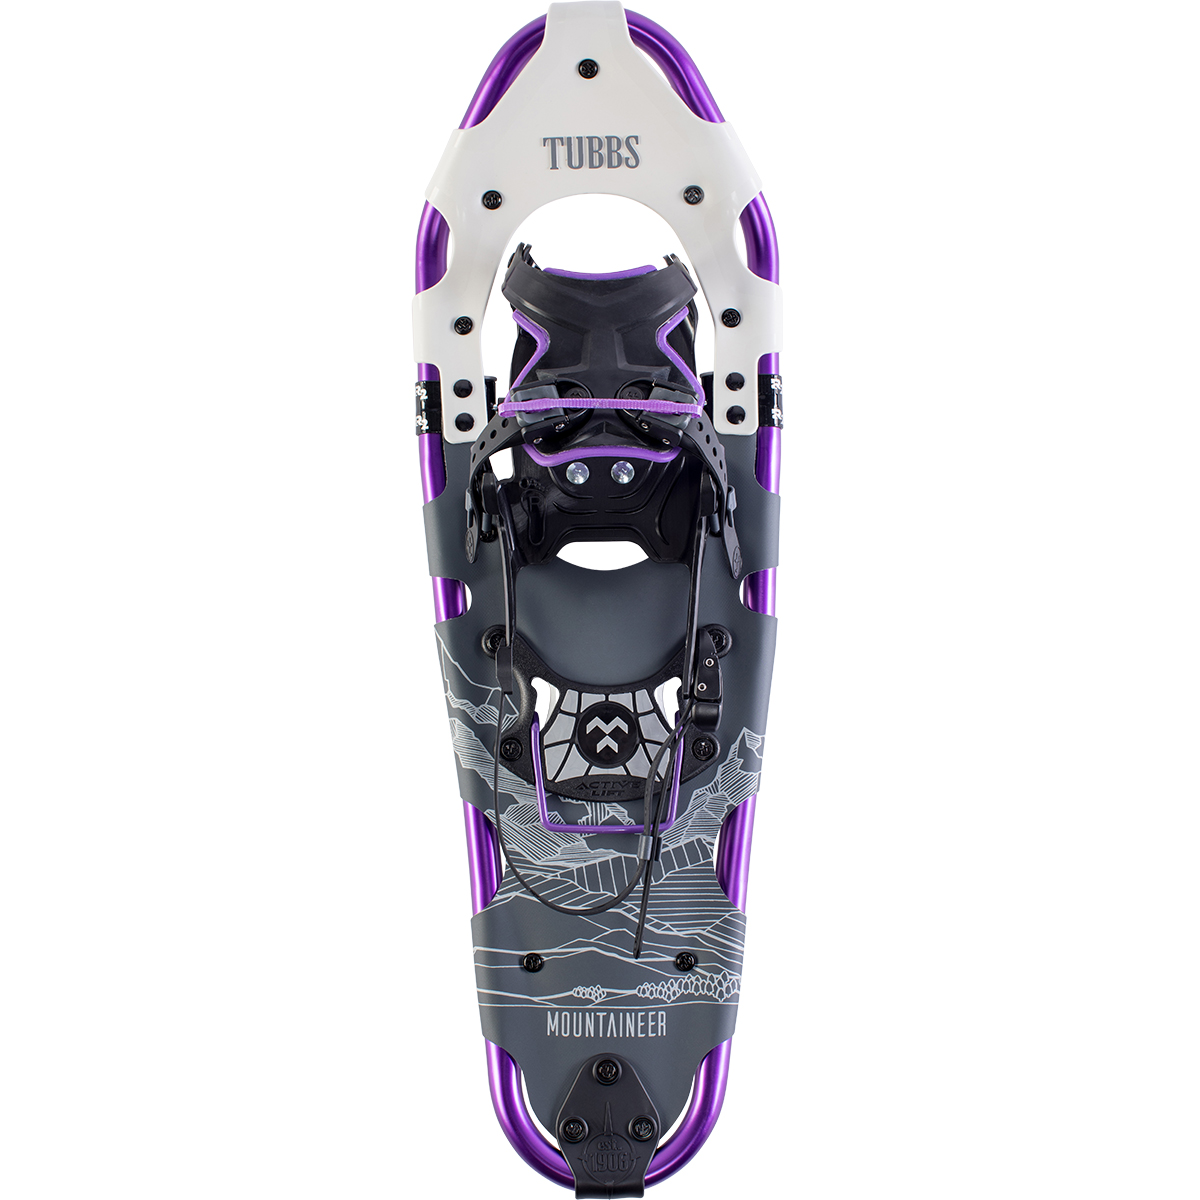 Tubbs Women's Mountaineer 21" Snowshoes